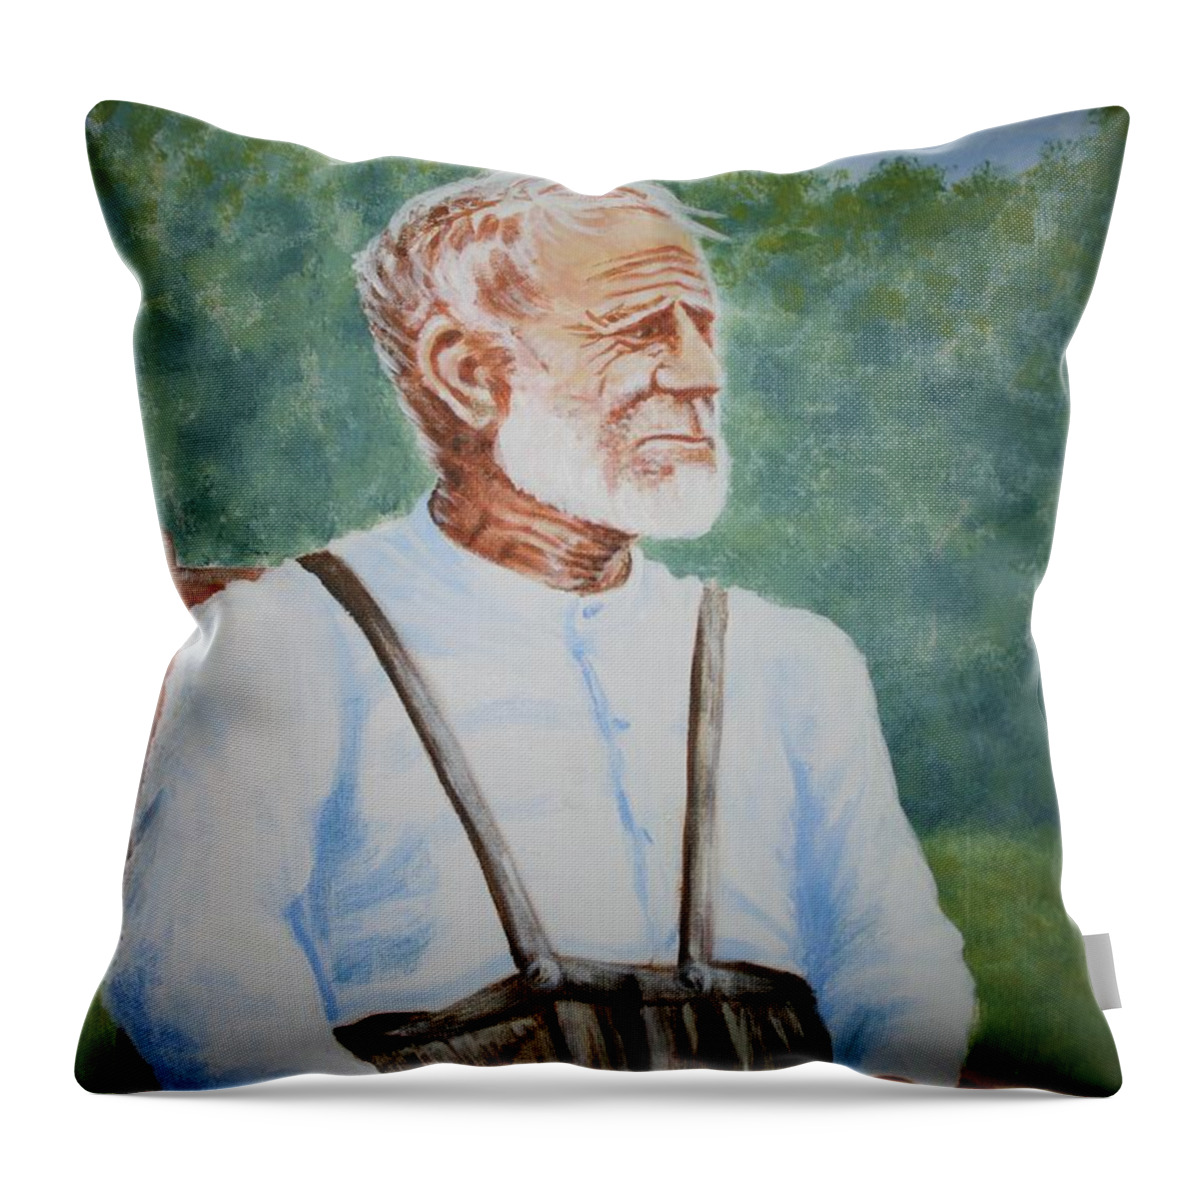 Squire Throw Pillow featuring the painting Squire Bottom by Stacy C Bottoms